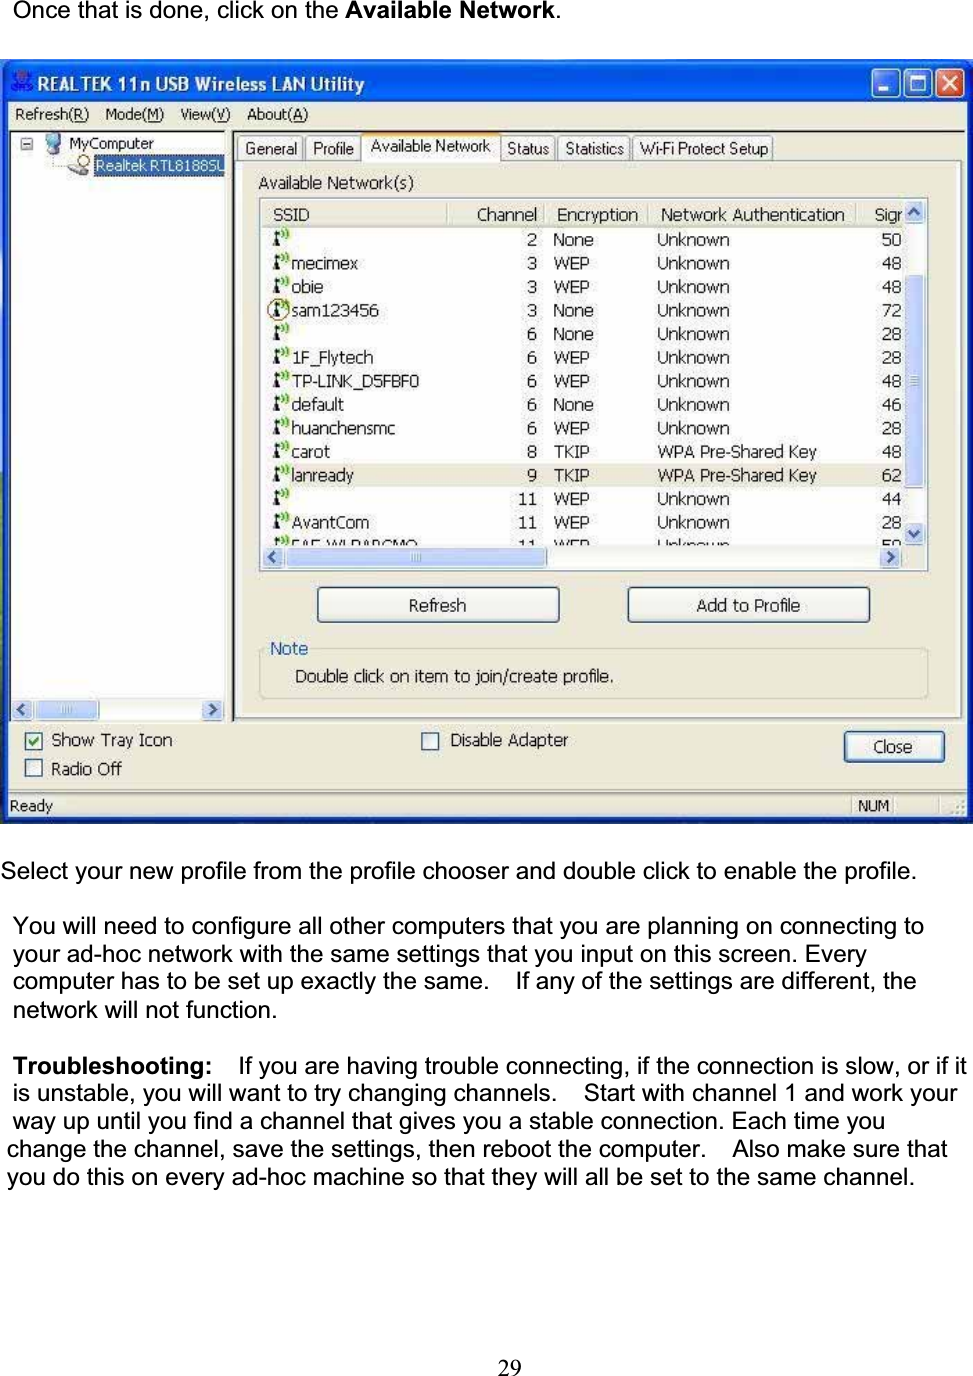 29Once that is done, click on the Available Network.Select your new profile from the profile chooser and double click to enable the profile. You will need to configure all other computers that you are planning on connecting toyour ad-hoc network with the same settings that you input on this screen. Every computer has to be set up exactly the same.  If any of the settings are different, the network will not function.Troubleshooting:  If you are having trouble connecting, if the connection is slow, or if itis unstable, you will want to try changing channels.  Start with channel 1 and work your way up until you find a channel that gives you a stable connection. Each time youchange the channel, save the settings, then reboot the computer.    Also make sure thatyou do this on every ad-hoc machine so that they will all be set to the same channel.